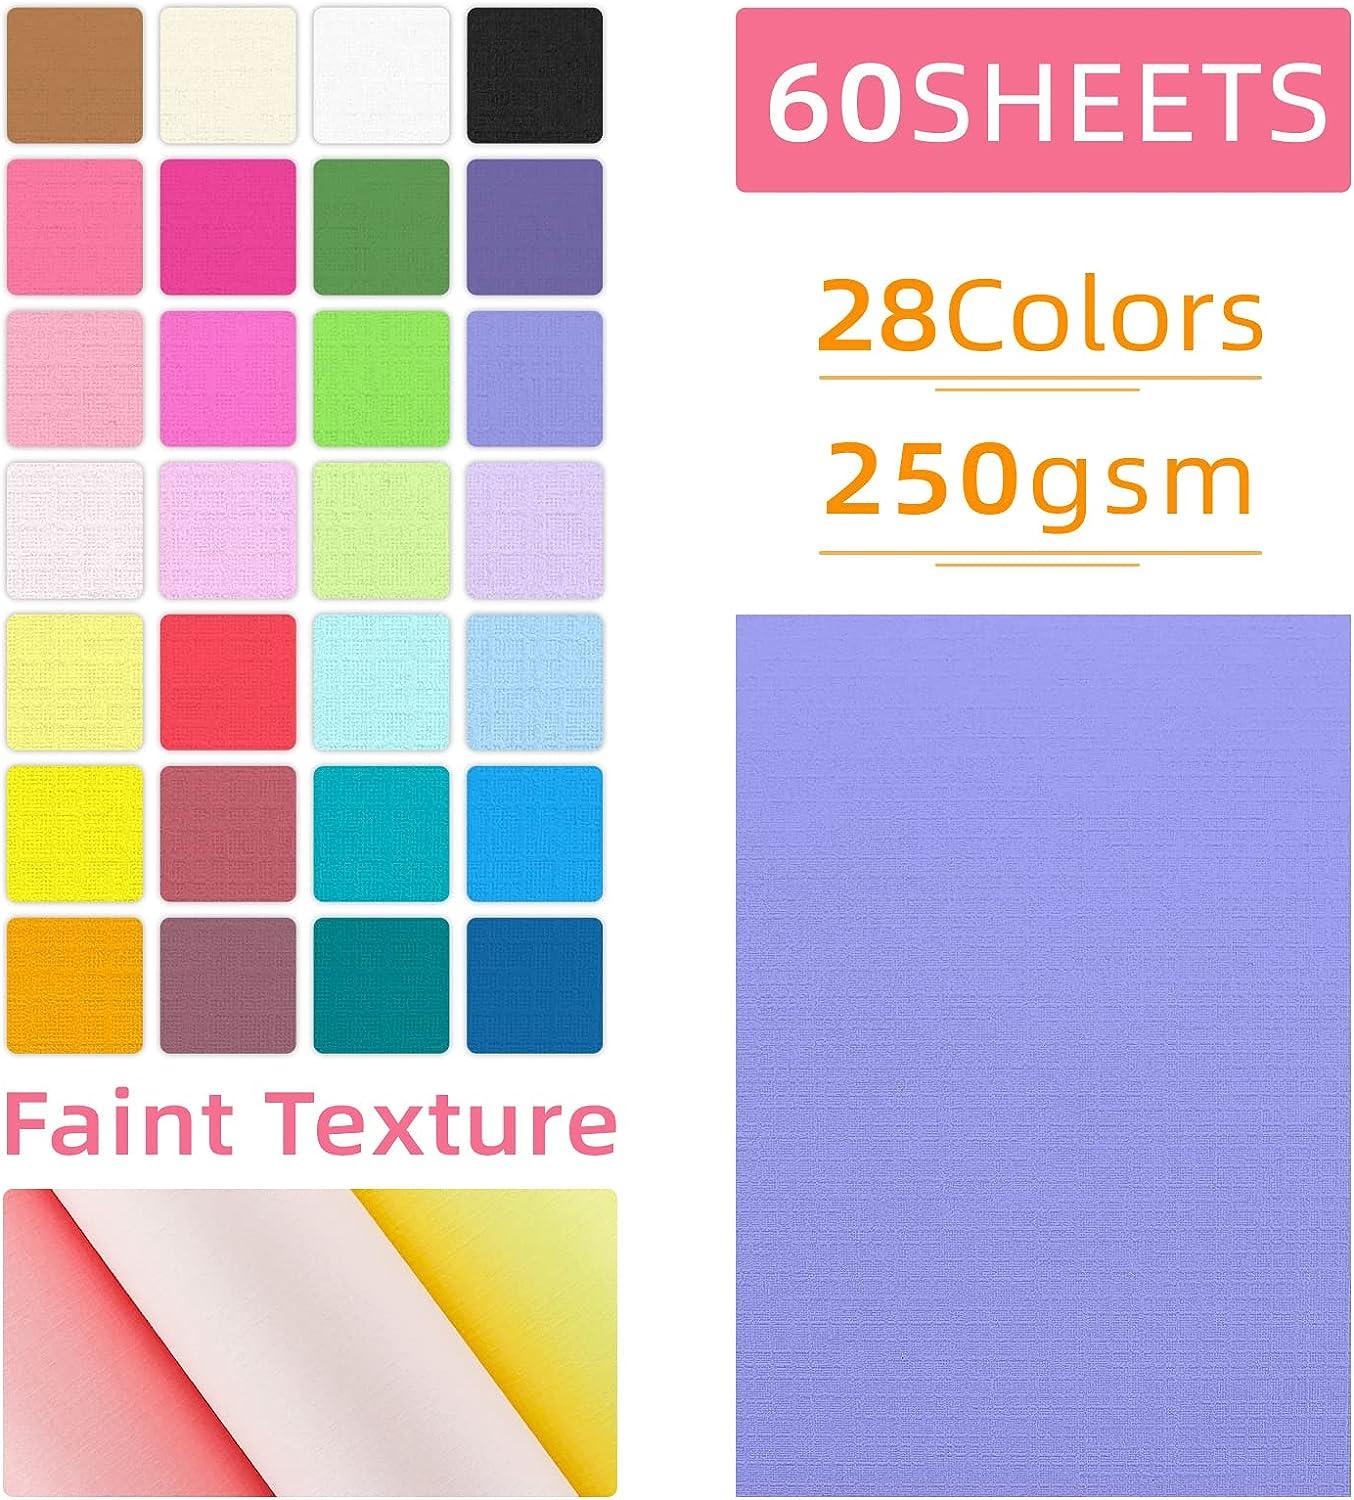 60 sheets Color Cardstock, 28 Assorted Colors 250gsm A4 Size, Double Sided  Printed Cardstock Paper, Premium Thick Card Stock for Card Making, Craft